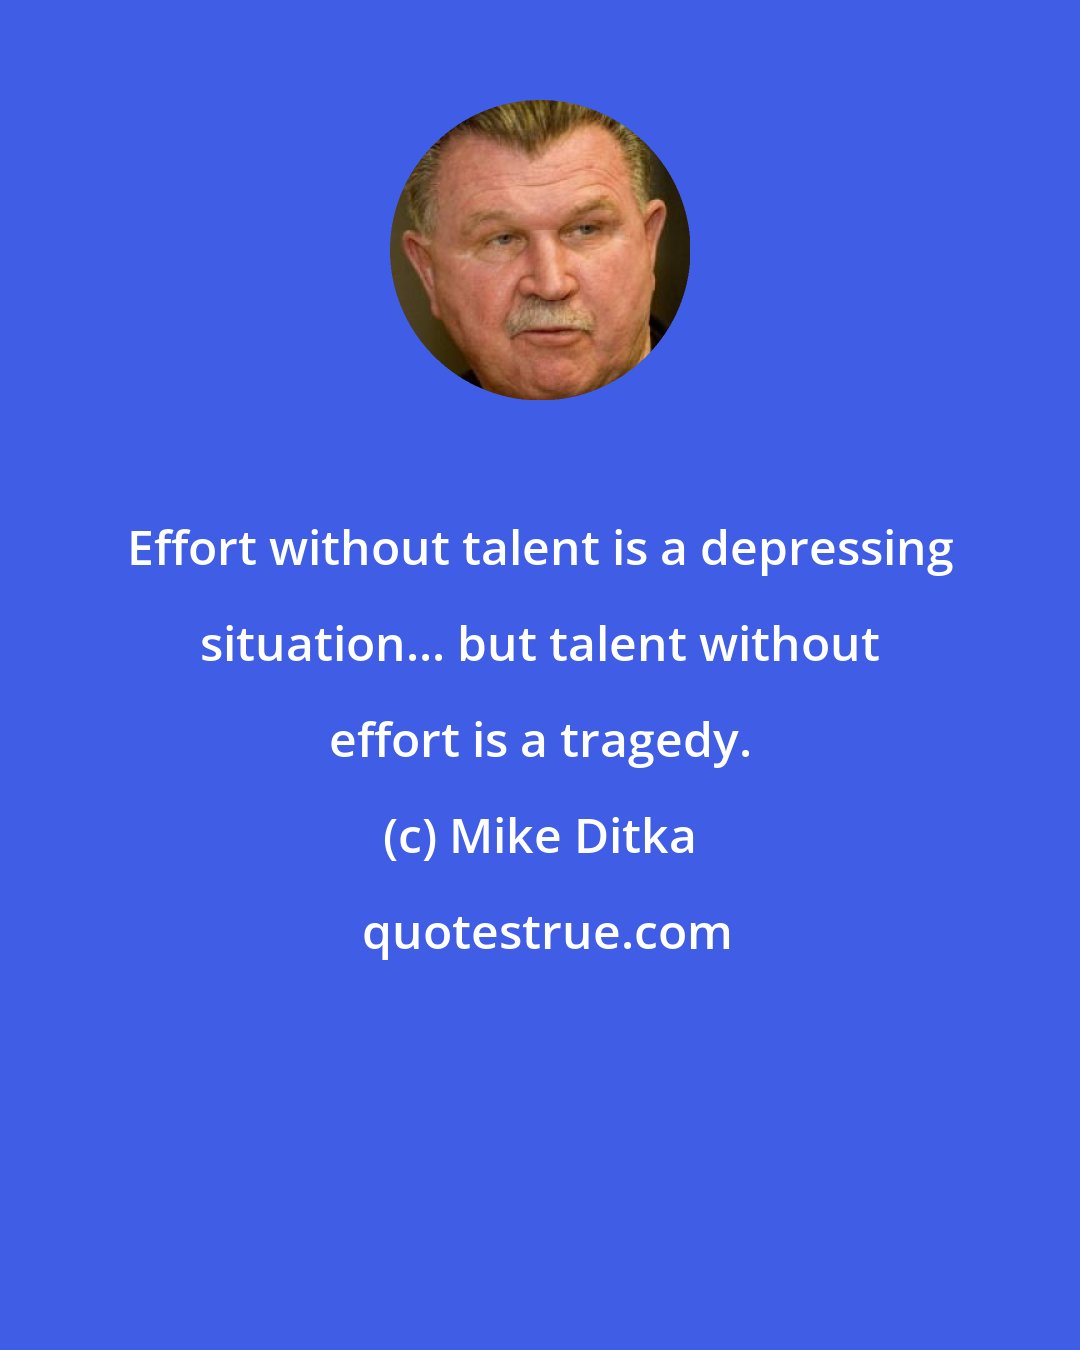 Mike Ditka: Effort without talent is a depressing situation... but talent without effort is a tragedy.